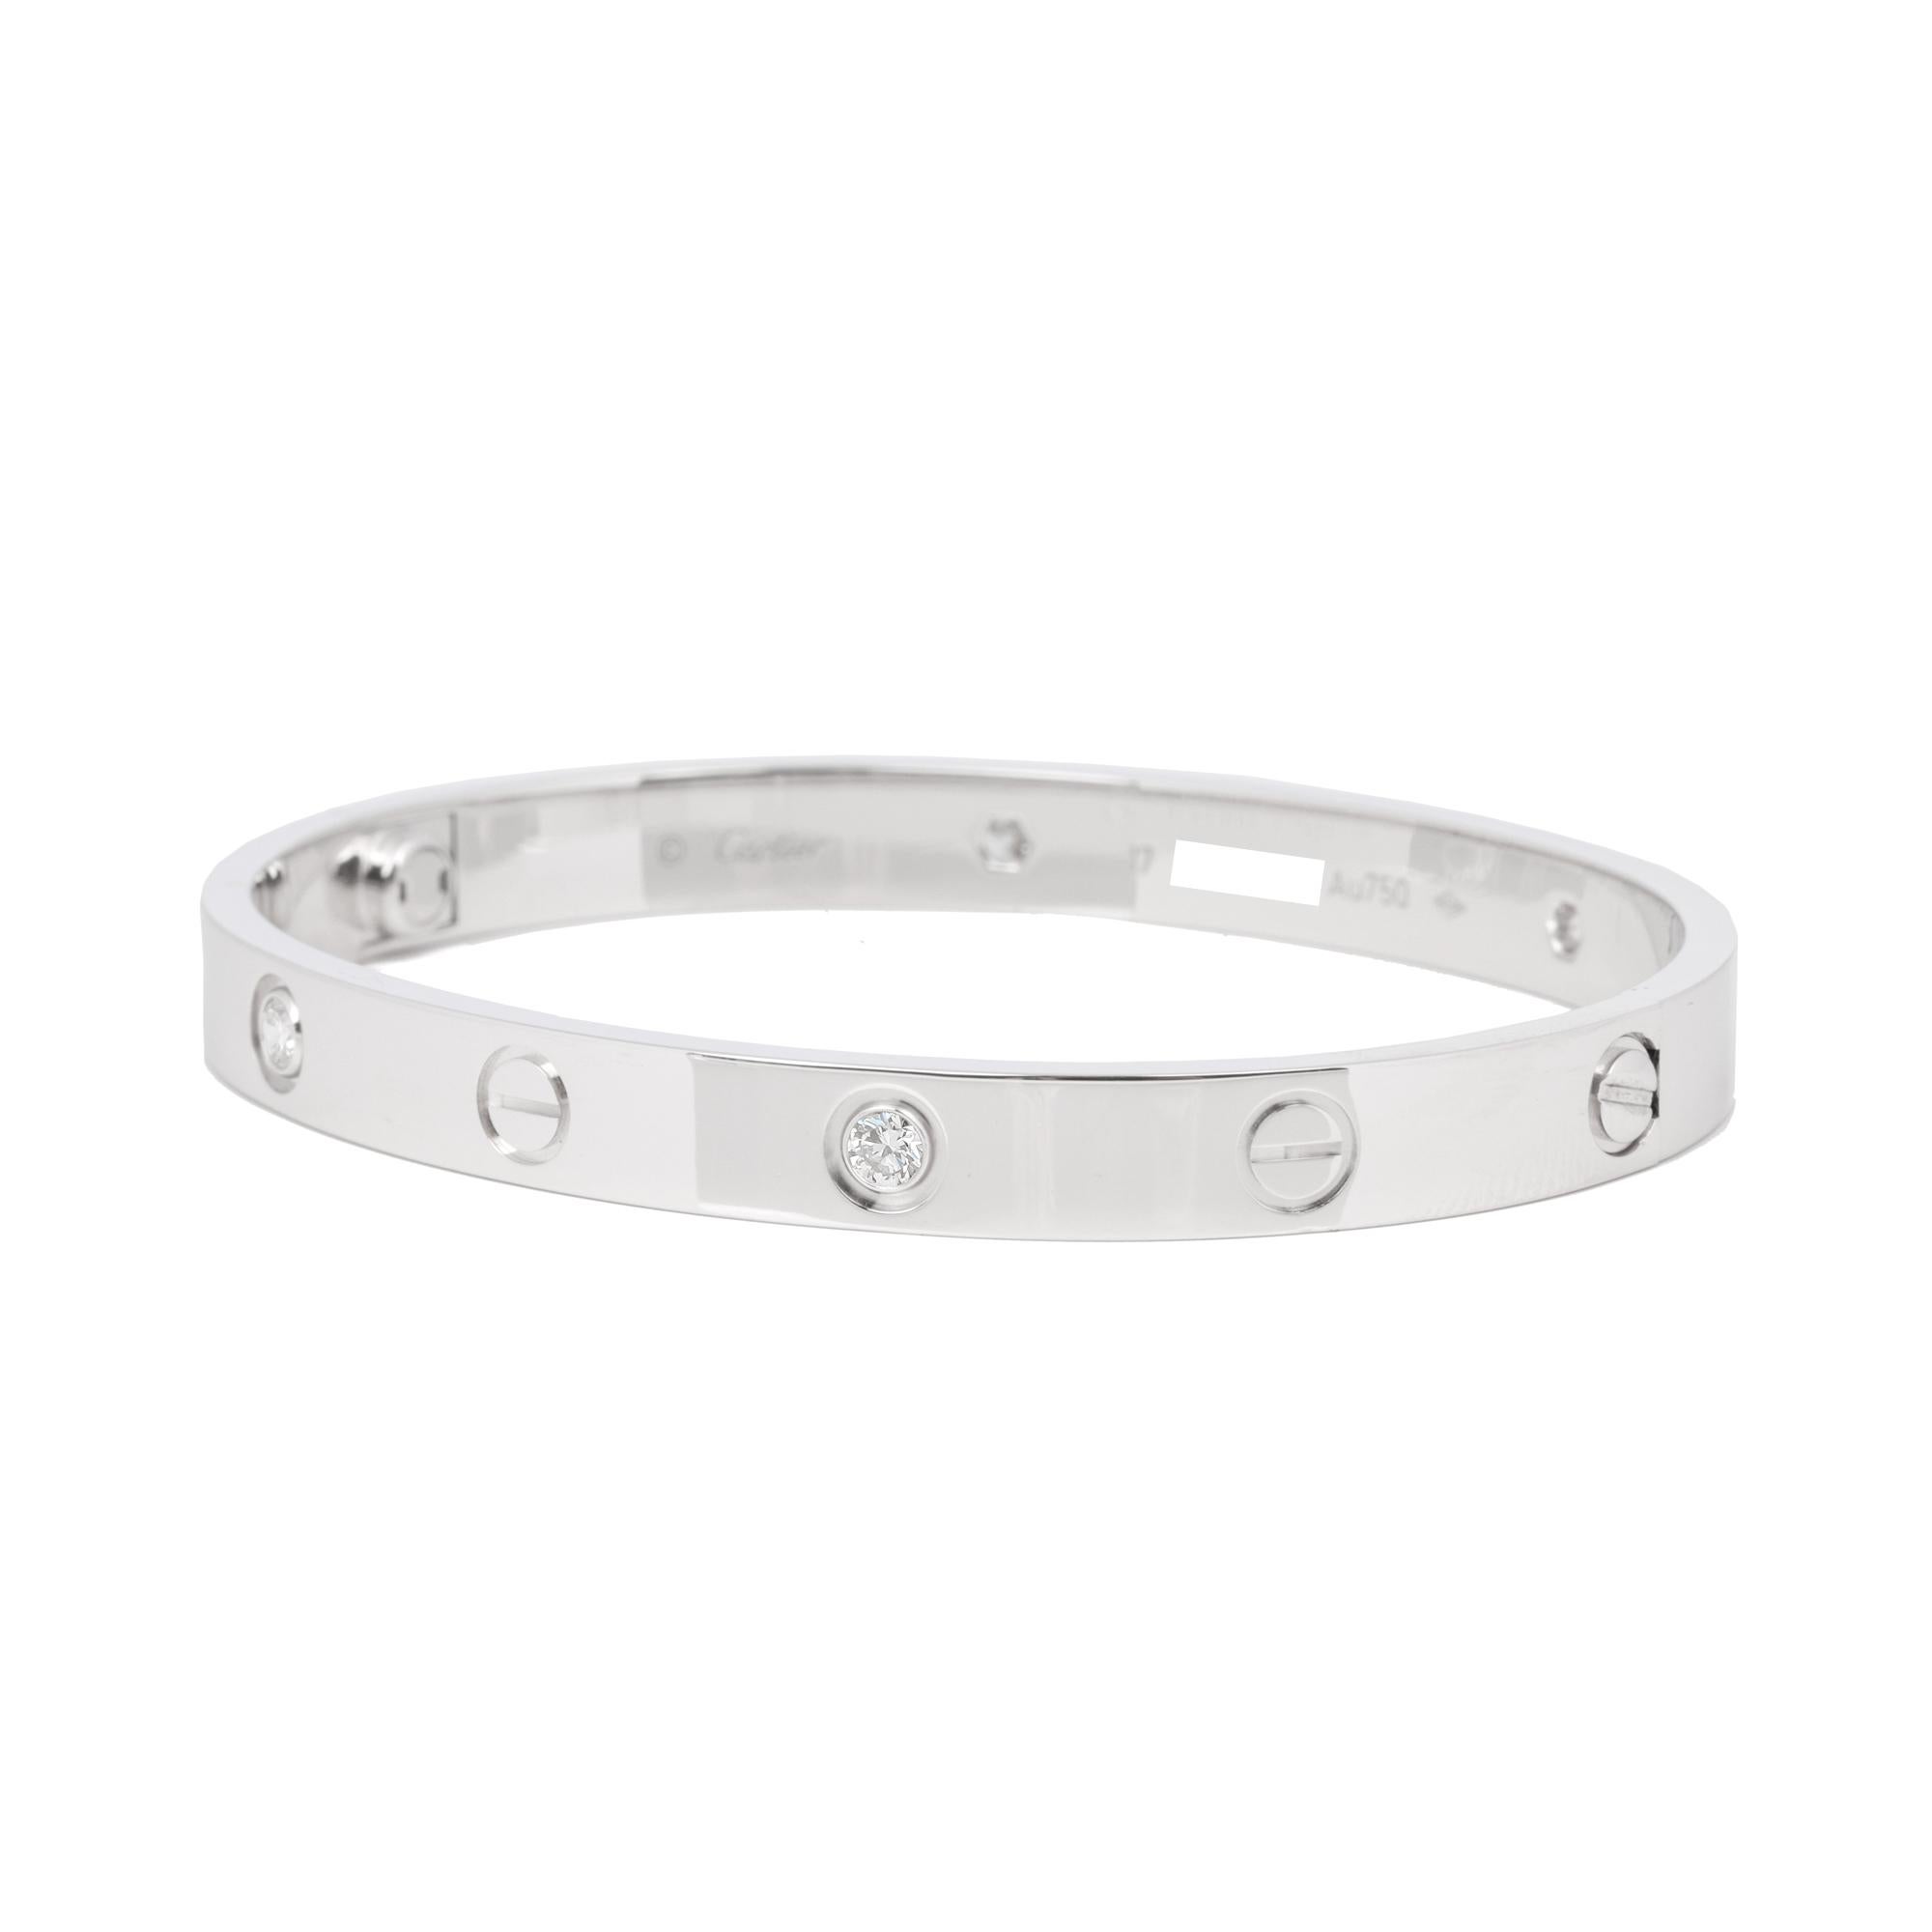 Cartier 4 Diamond 18ct White Gold Love Bangle

Brand- Cartier
Model- 4 Diamond Love Bangle
Product Type- Bracelet
Serial Number- CA****
Accompanied By- Cartier Pouch, Service Papers, Screwdriver
Material(s)- 18ct White Gold
Gemstone-